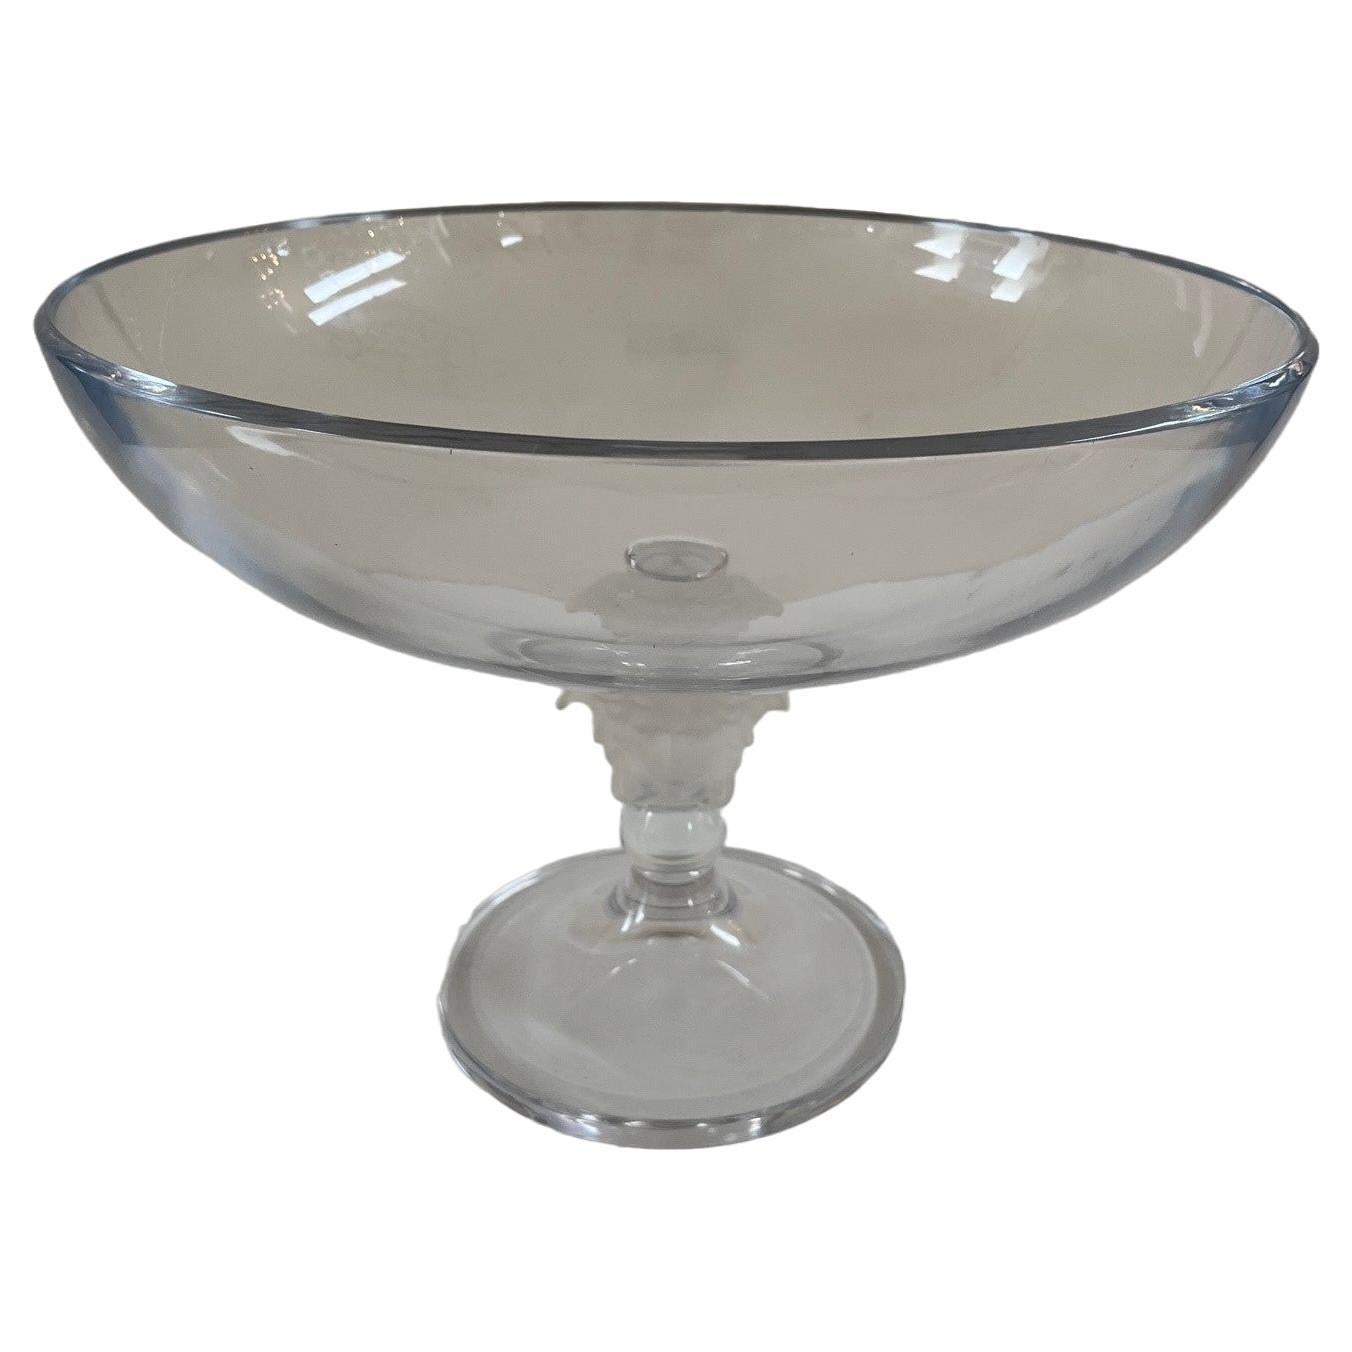 Versace Rosenthal Crystal Lumiere Medusa Footed Bowl (bol à pied)